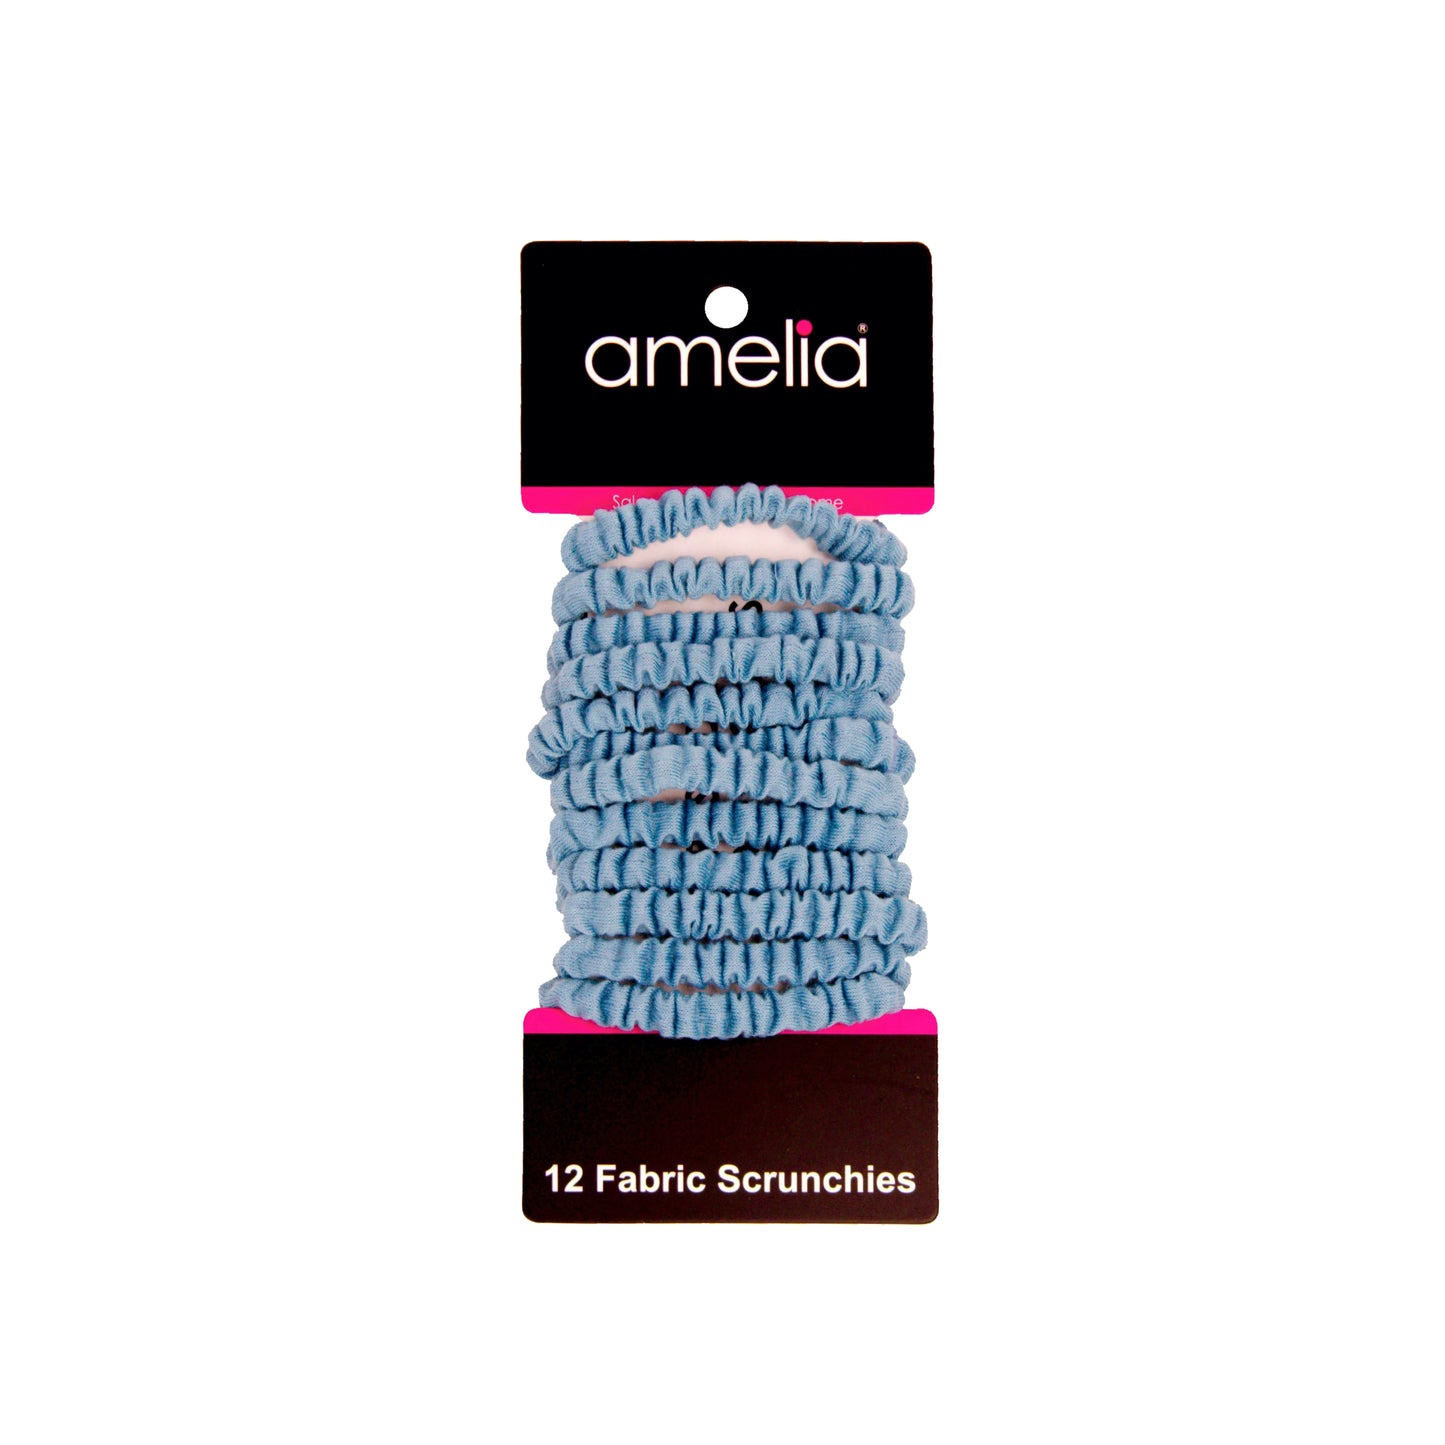 Amelia Beauty, Sky Blue Skinny Jersey Scrunchies, 2.125in Diameter, Gentle on Hair, Strong Hold, No Snag, No Dents or Creases. 12 Pack